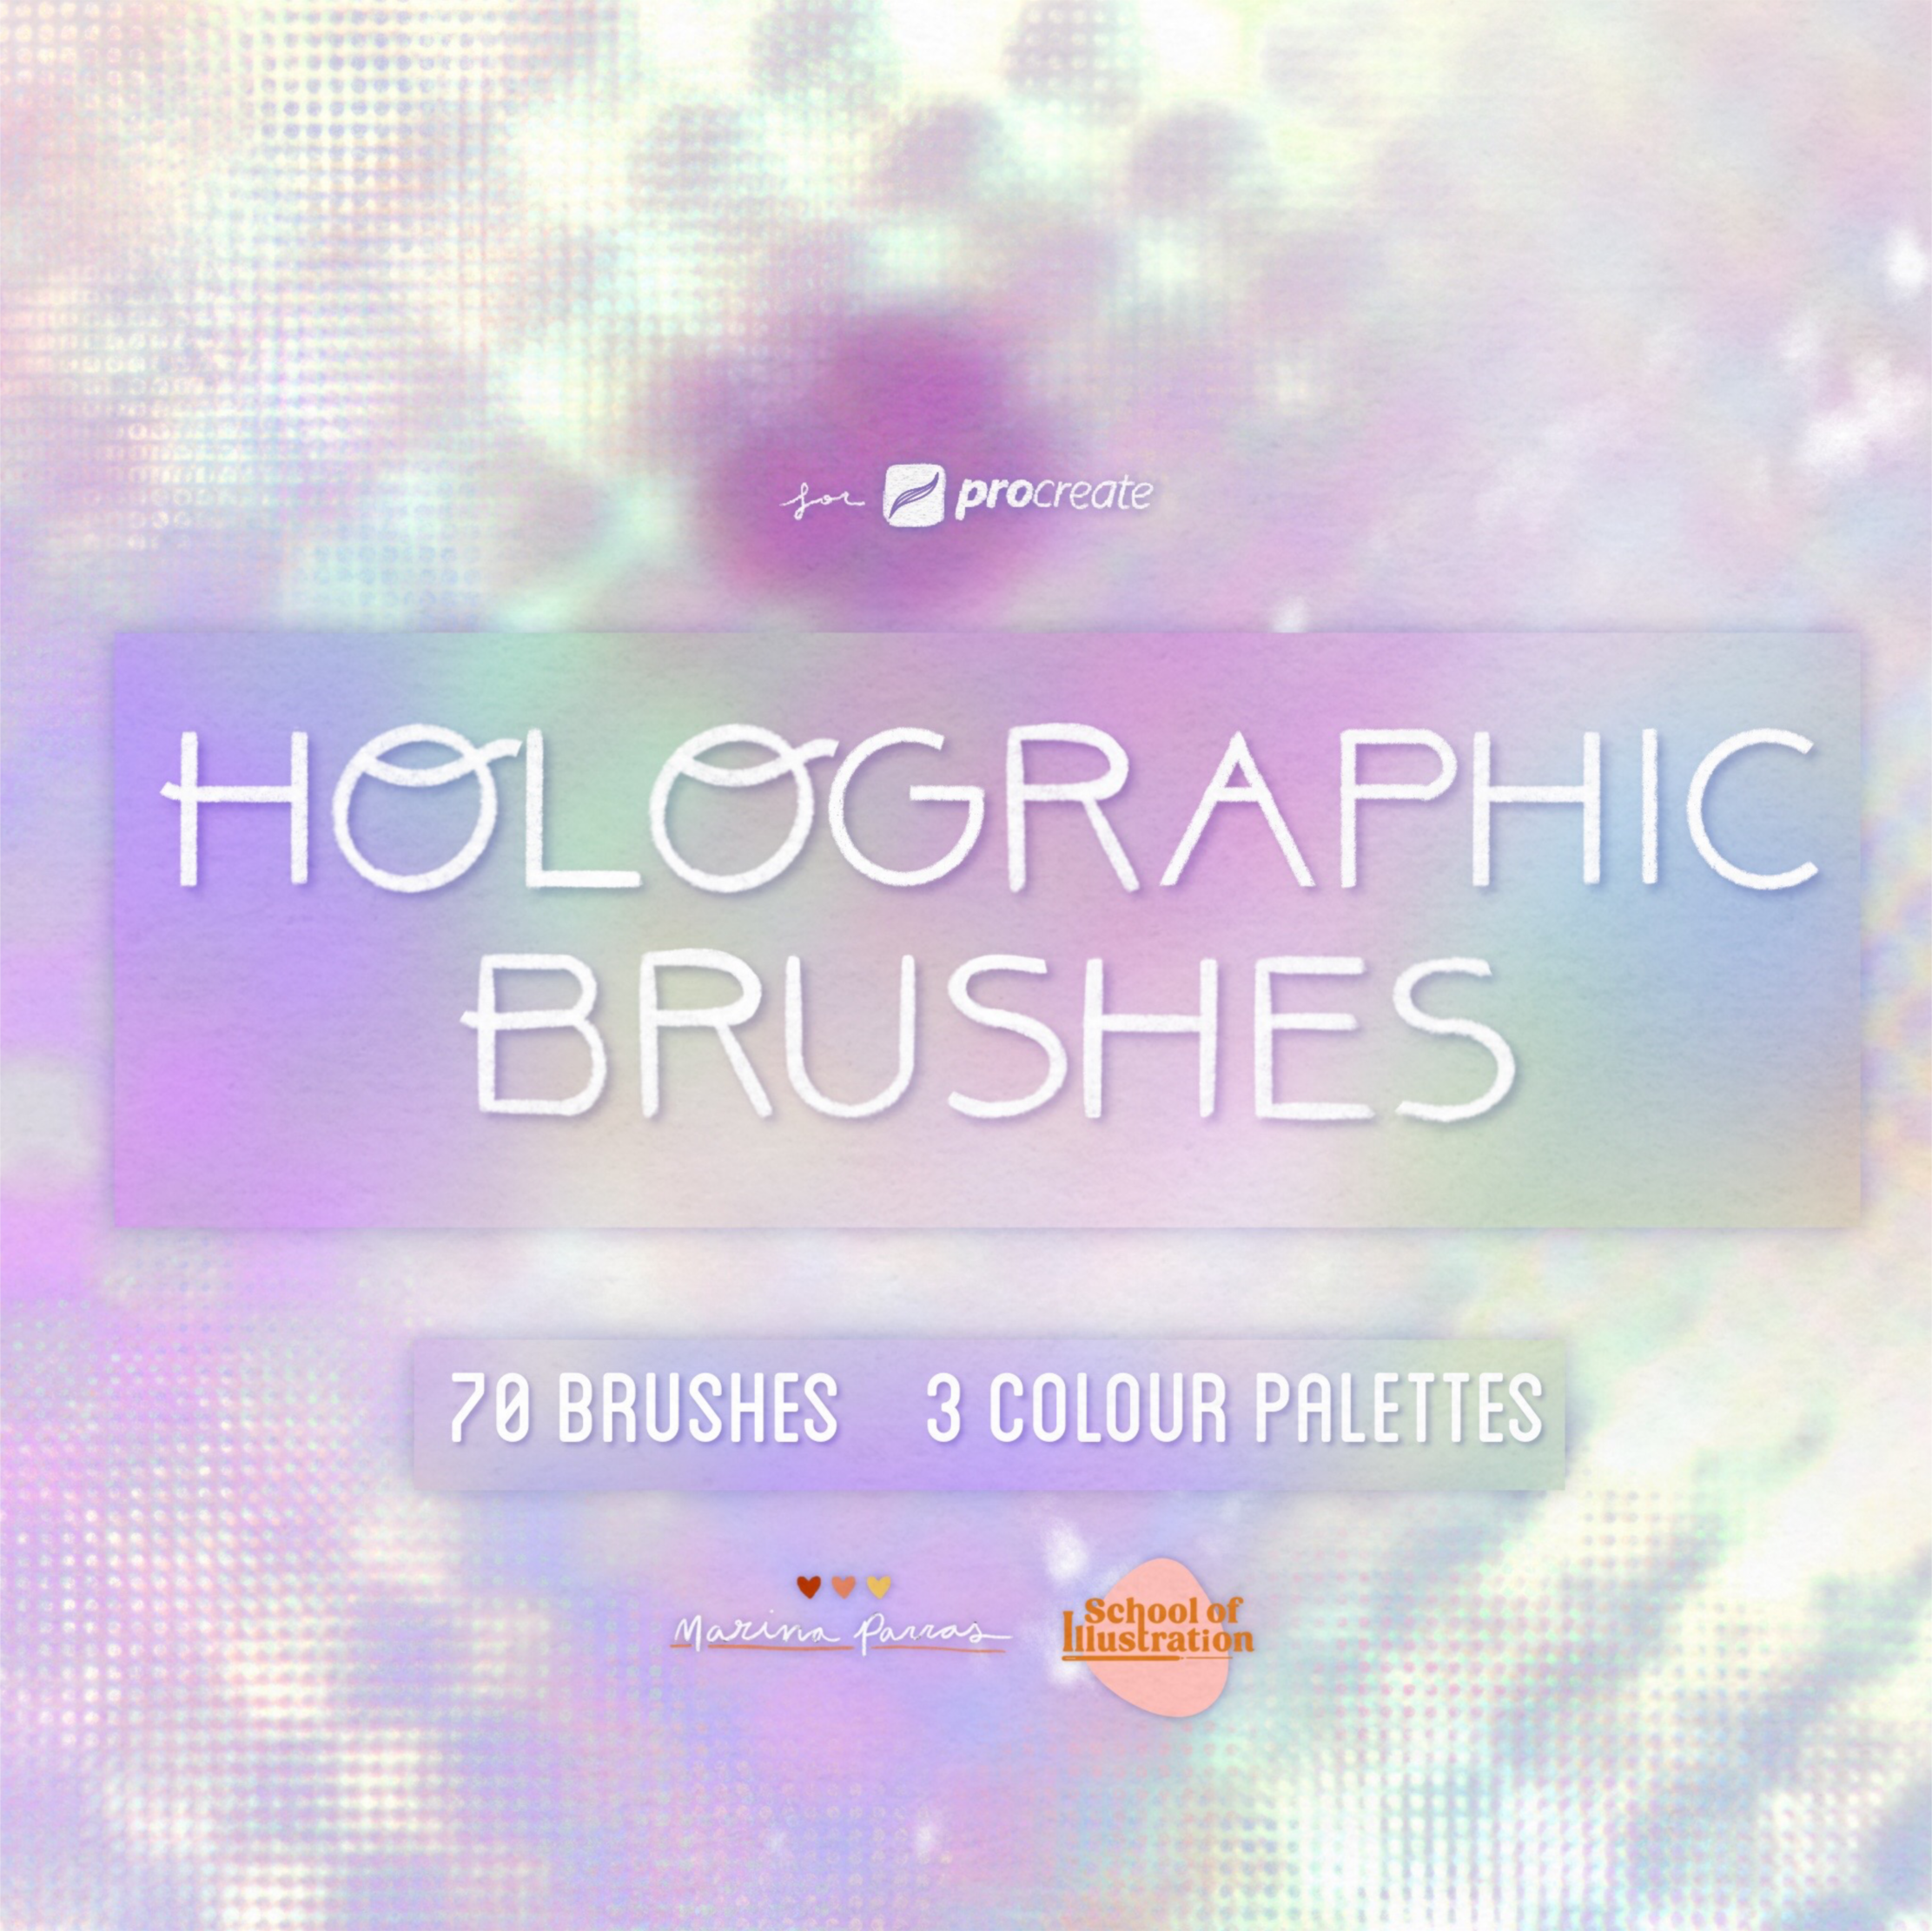 The holographic digital brush pack